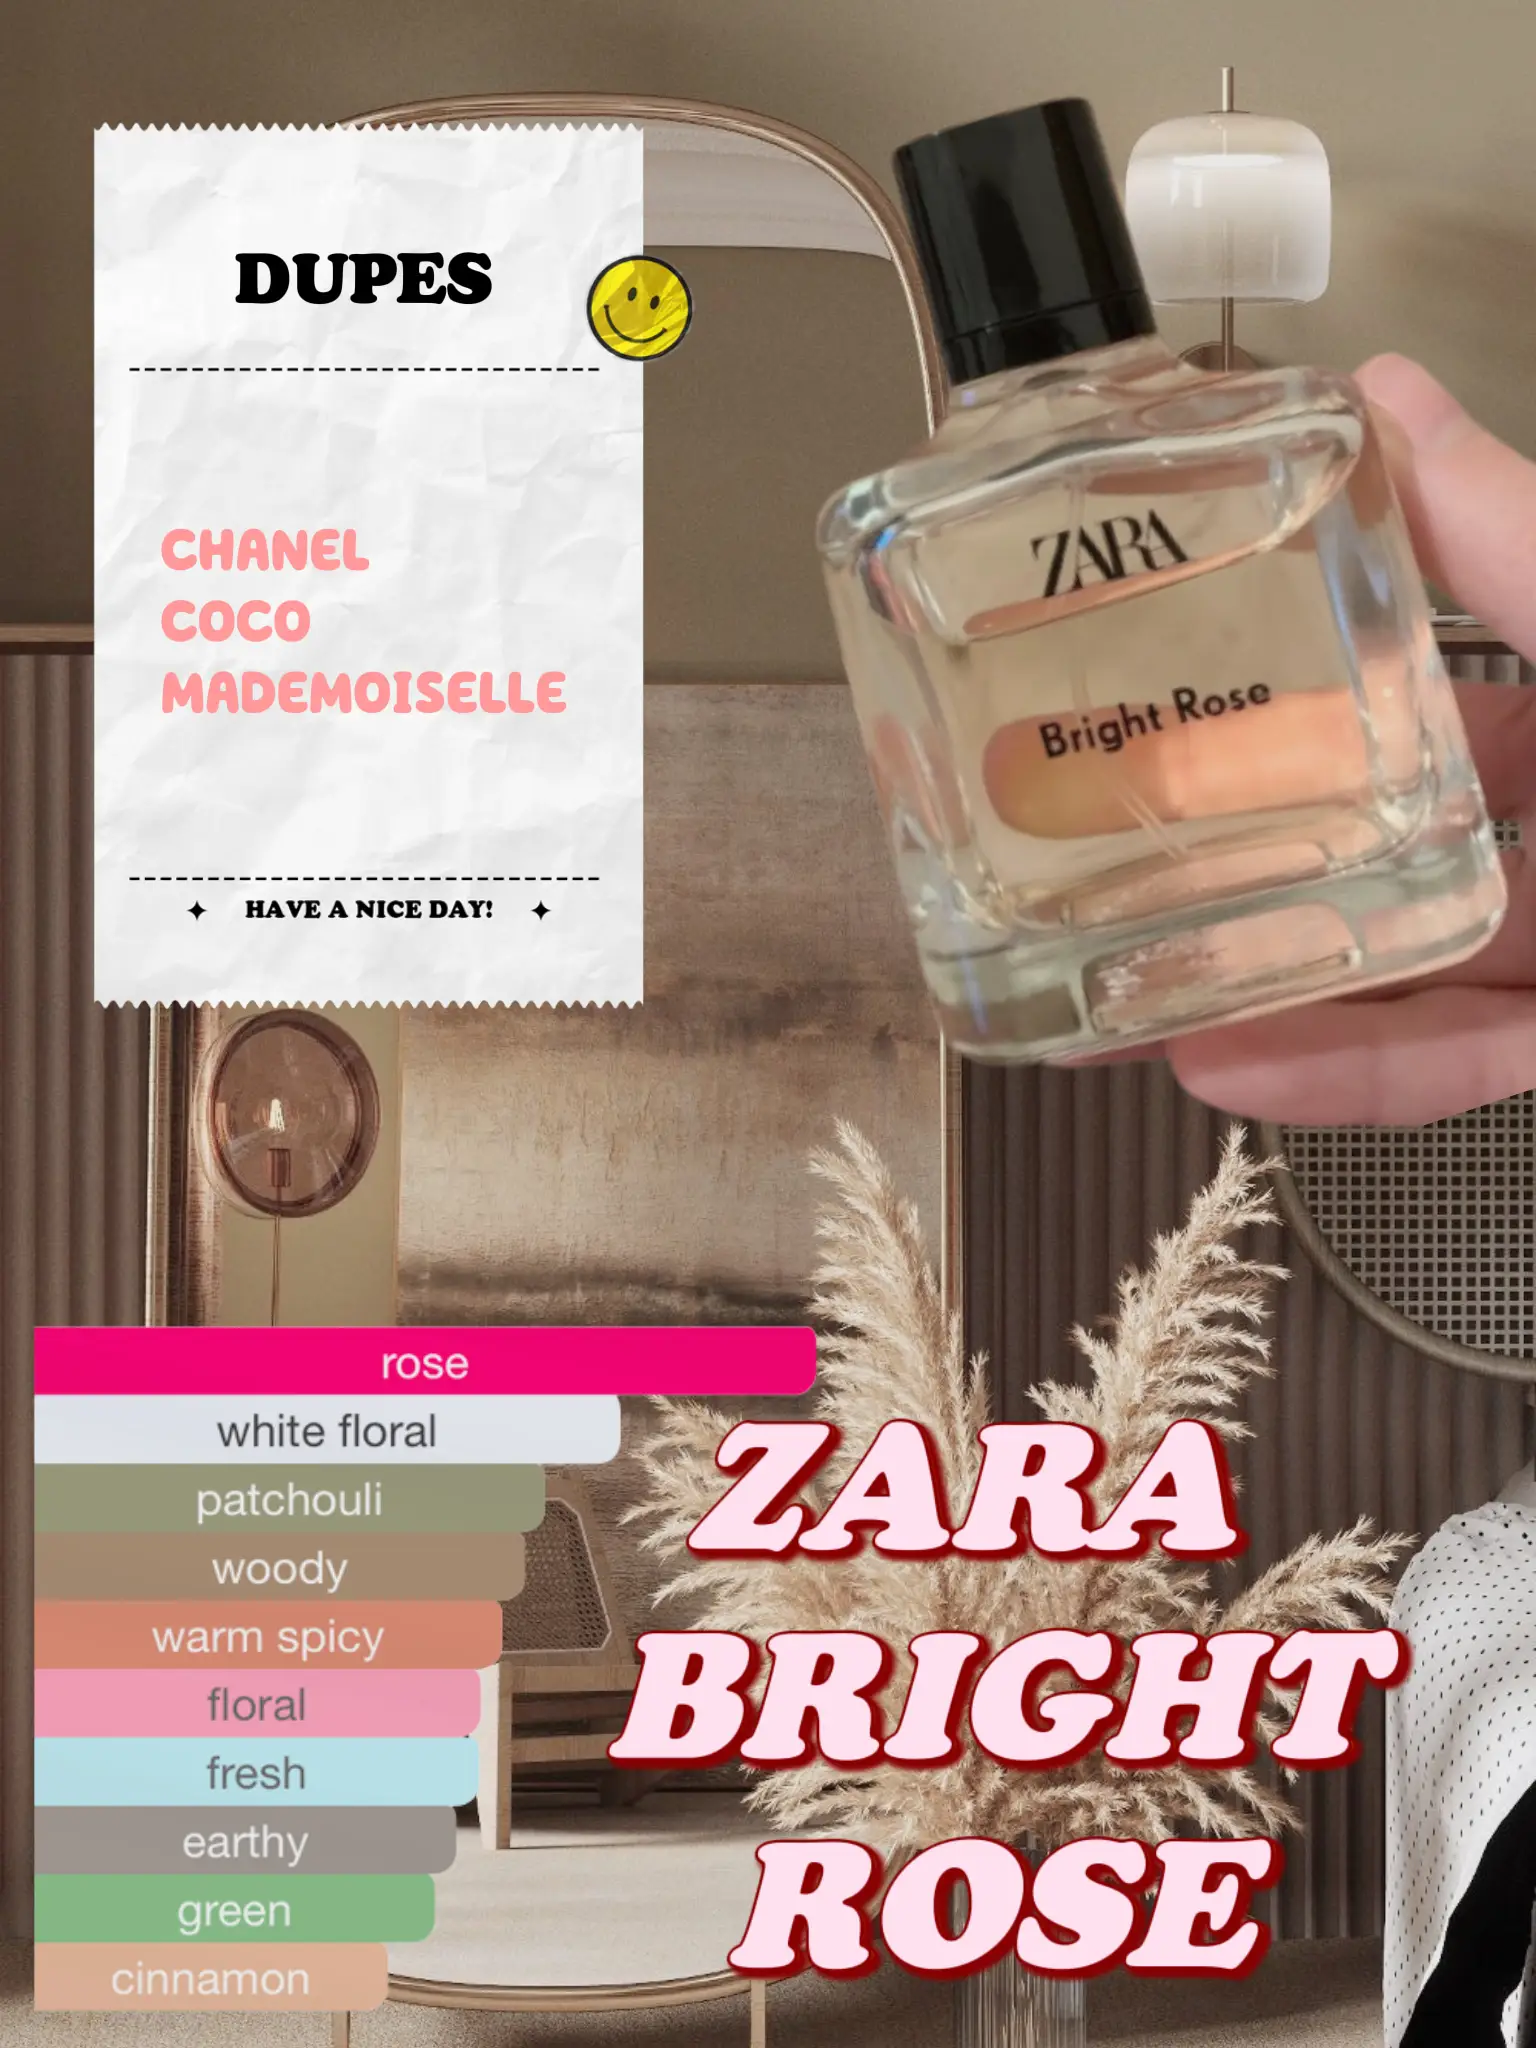 Zara Bright Rose is the identical of Chanel coco, Gallery posted by  Ladysharks